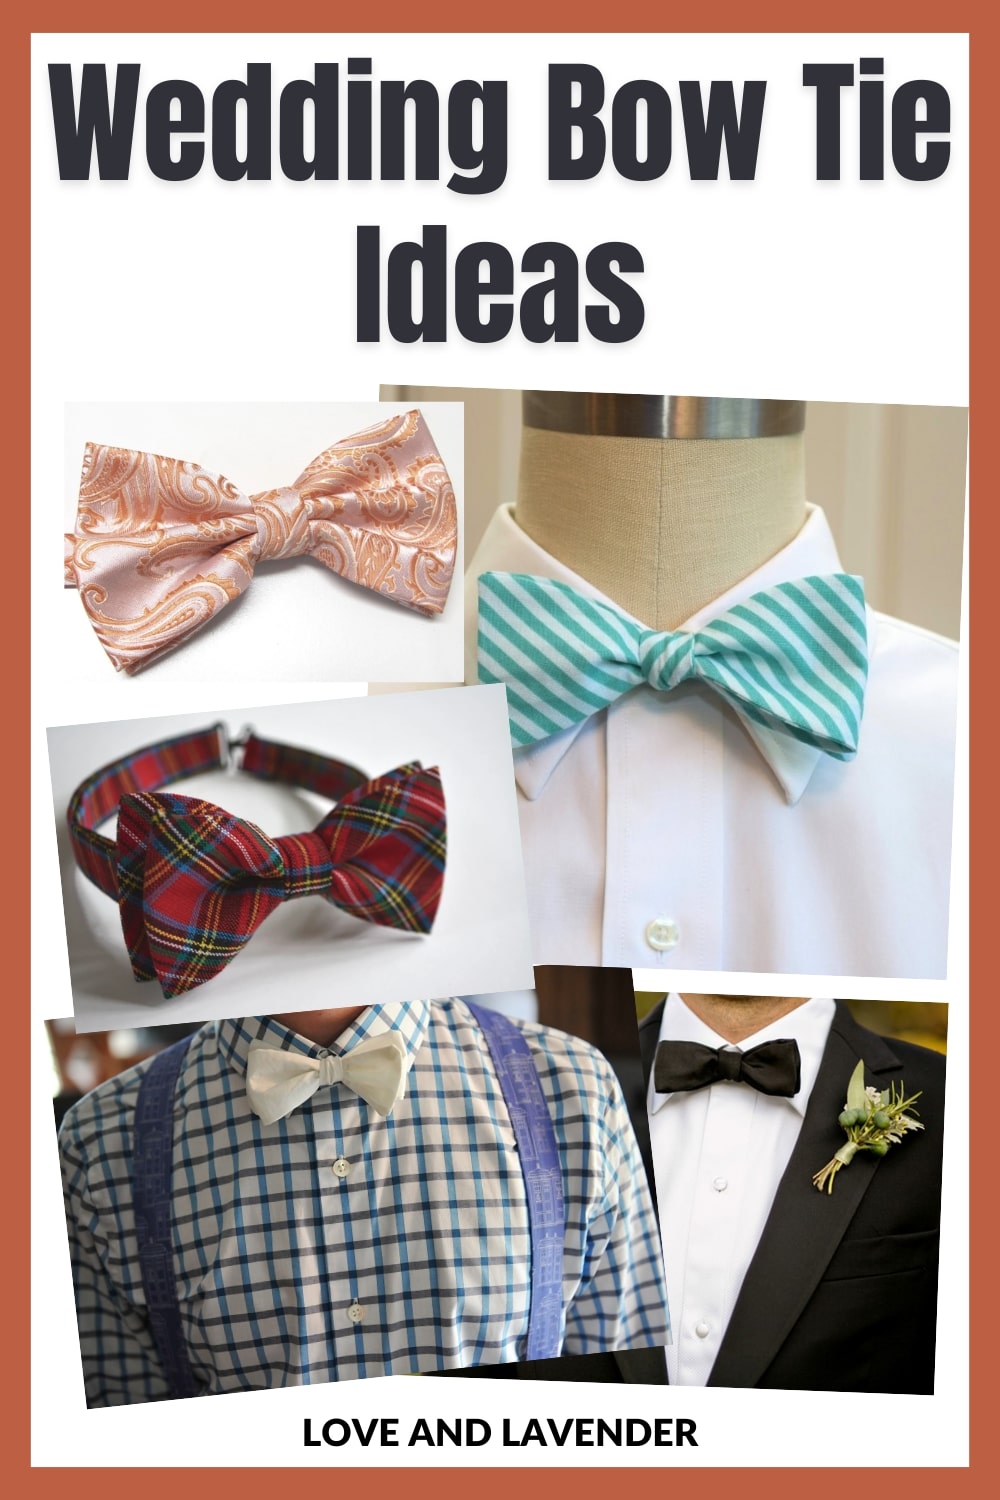 Looking for some unique wedding bow tie ideas? Check out our collection of the best bow ties in solid colors, patterns, paisley, classic black, and even polka dot! Perfect for dressing up your everyday look or adding a touch of personality to your wedding outfit.